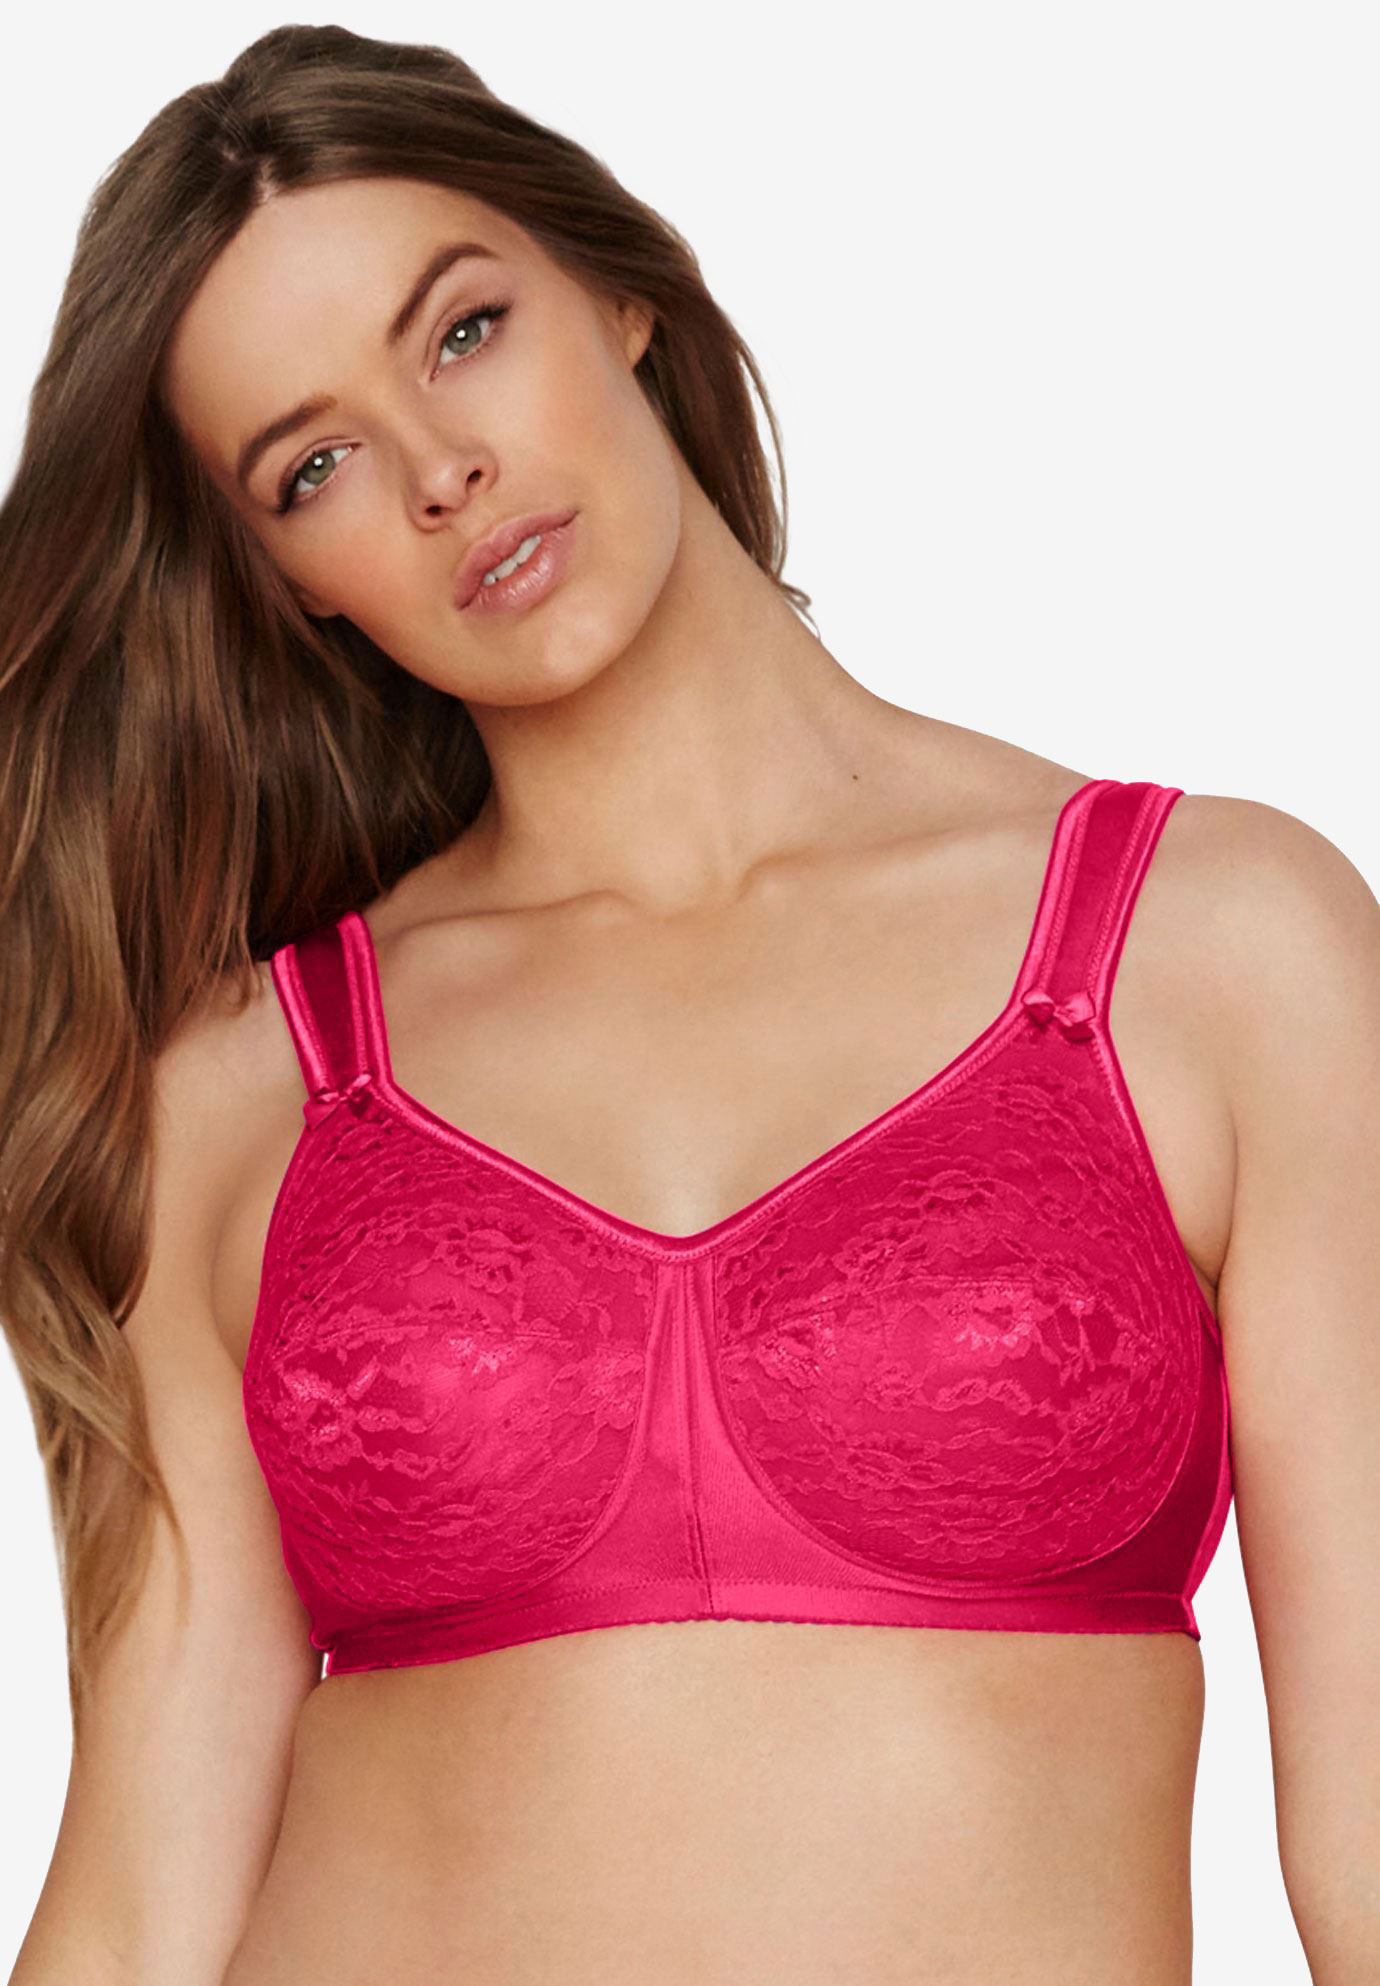 Easy Enhancer® Lace Wireless Bra By Comfort Choice® Plus Size Intimates Woman Within 